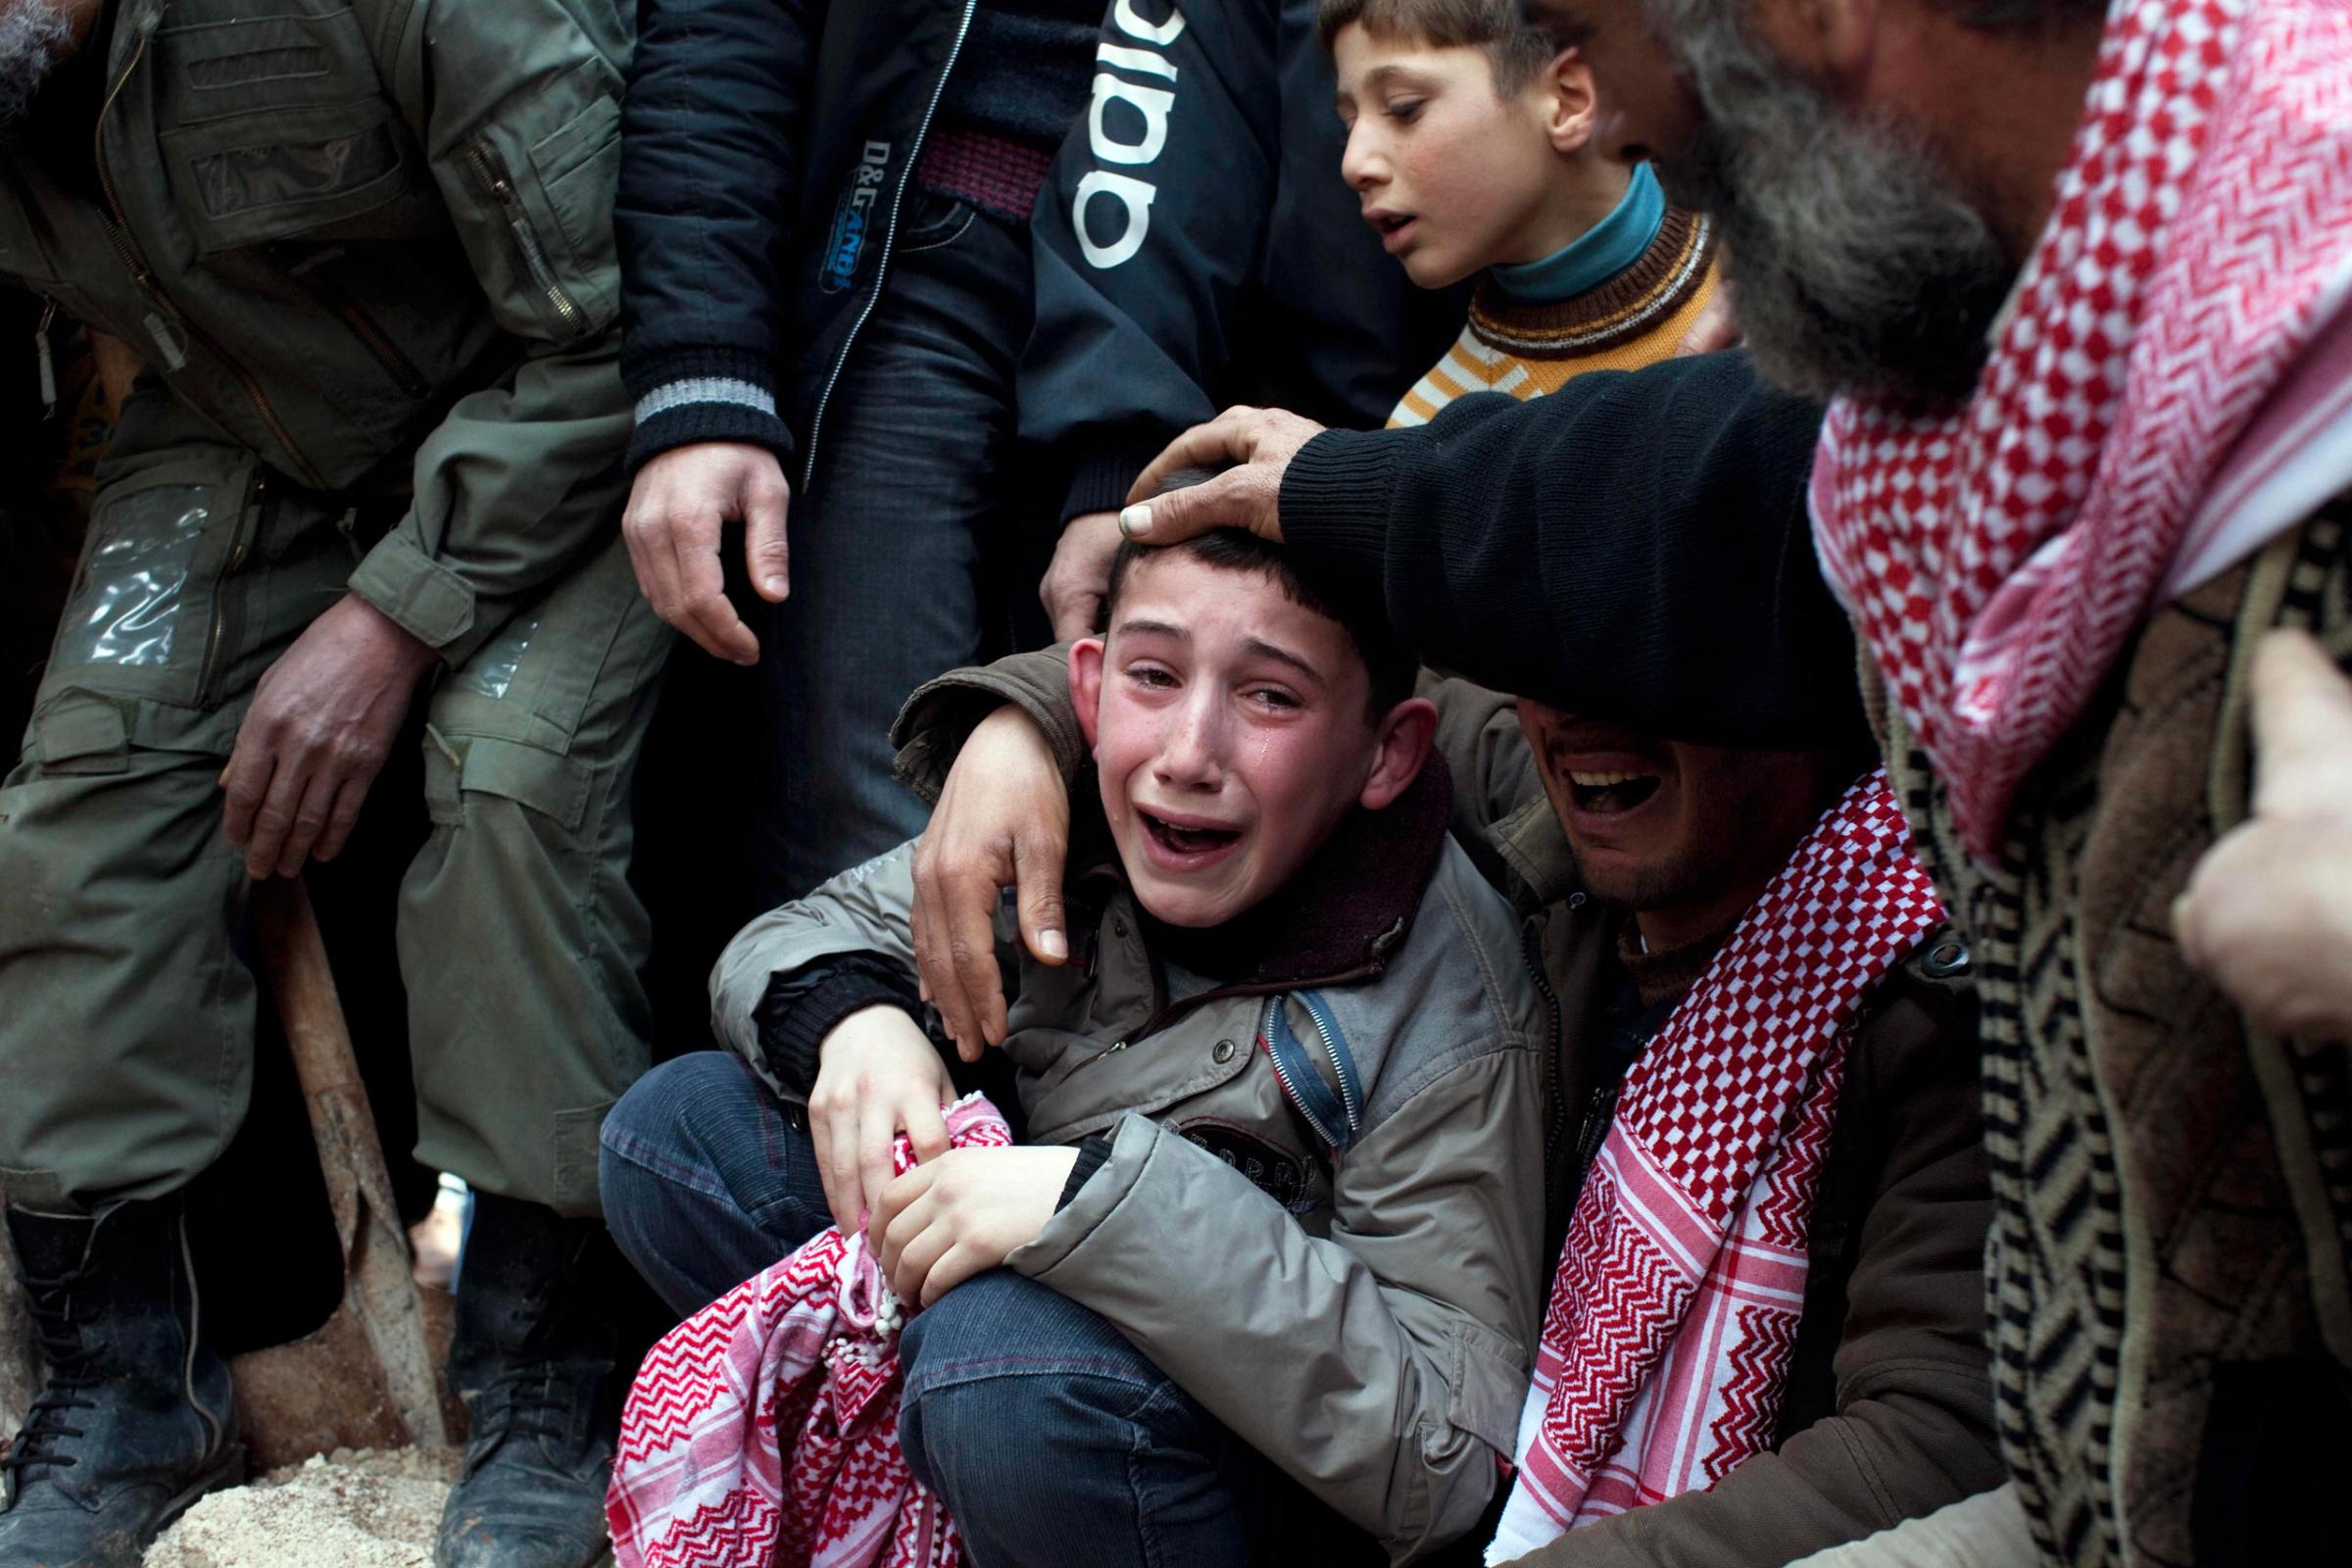 Ahmed, center, mourns his father Abdulaziz Abu Ahmed Khrer, who was killed by a Syrian Army sniper, during his funeral in Idlib, north Syria, on March 8, 2012.